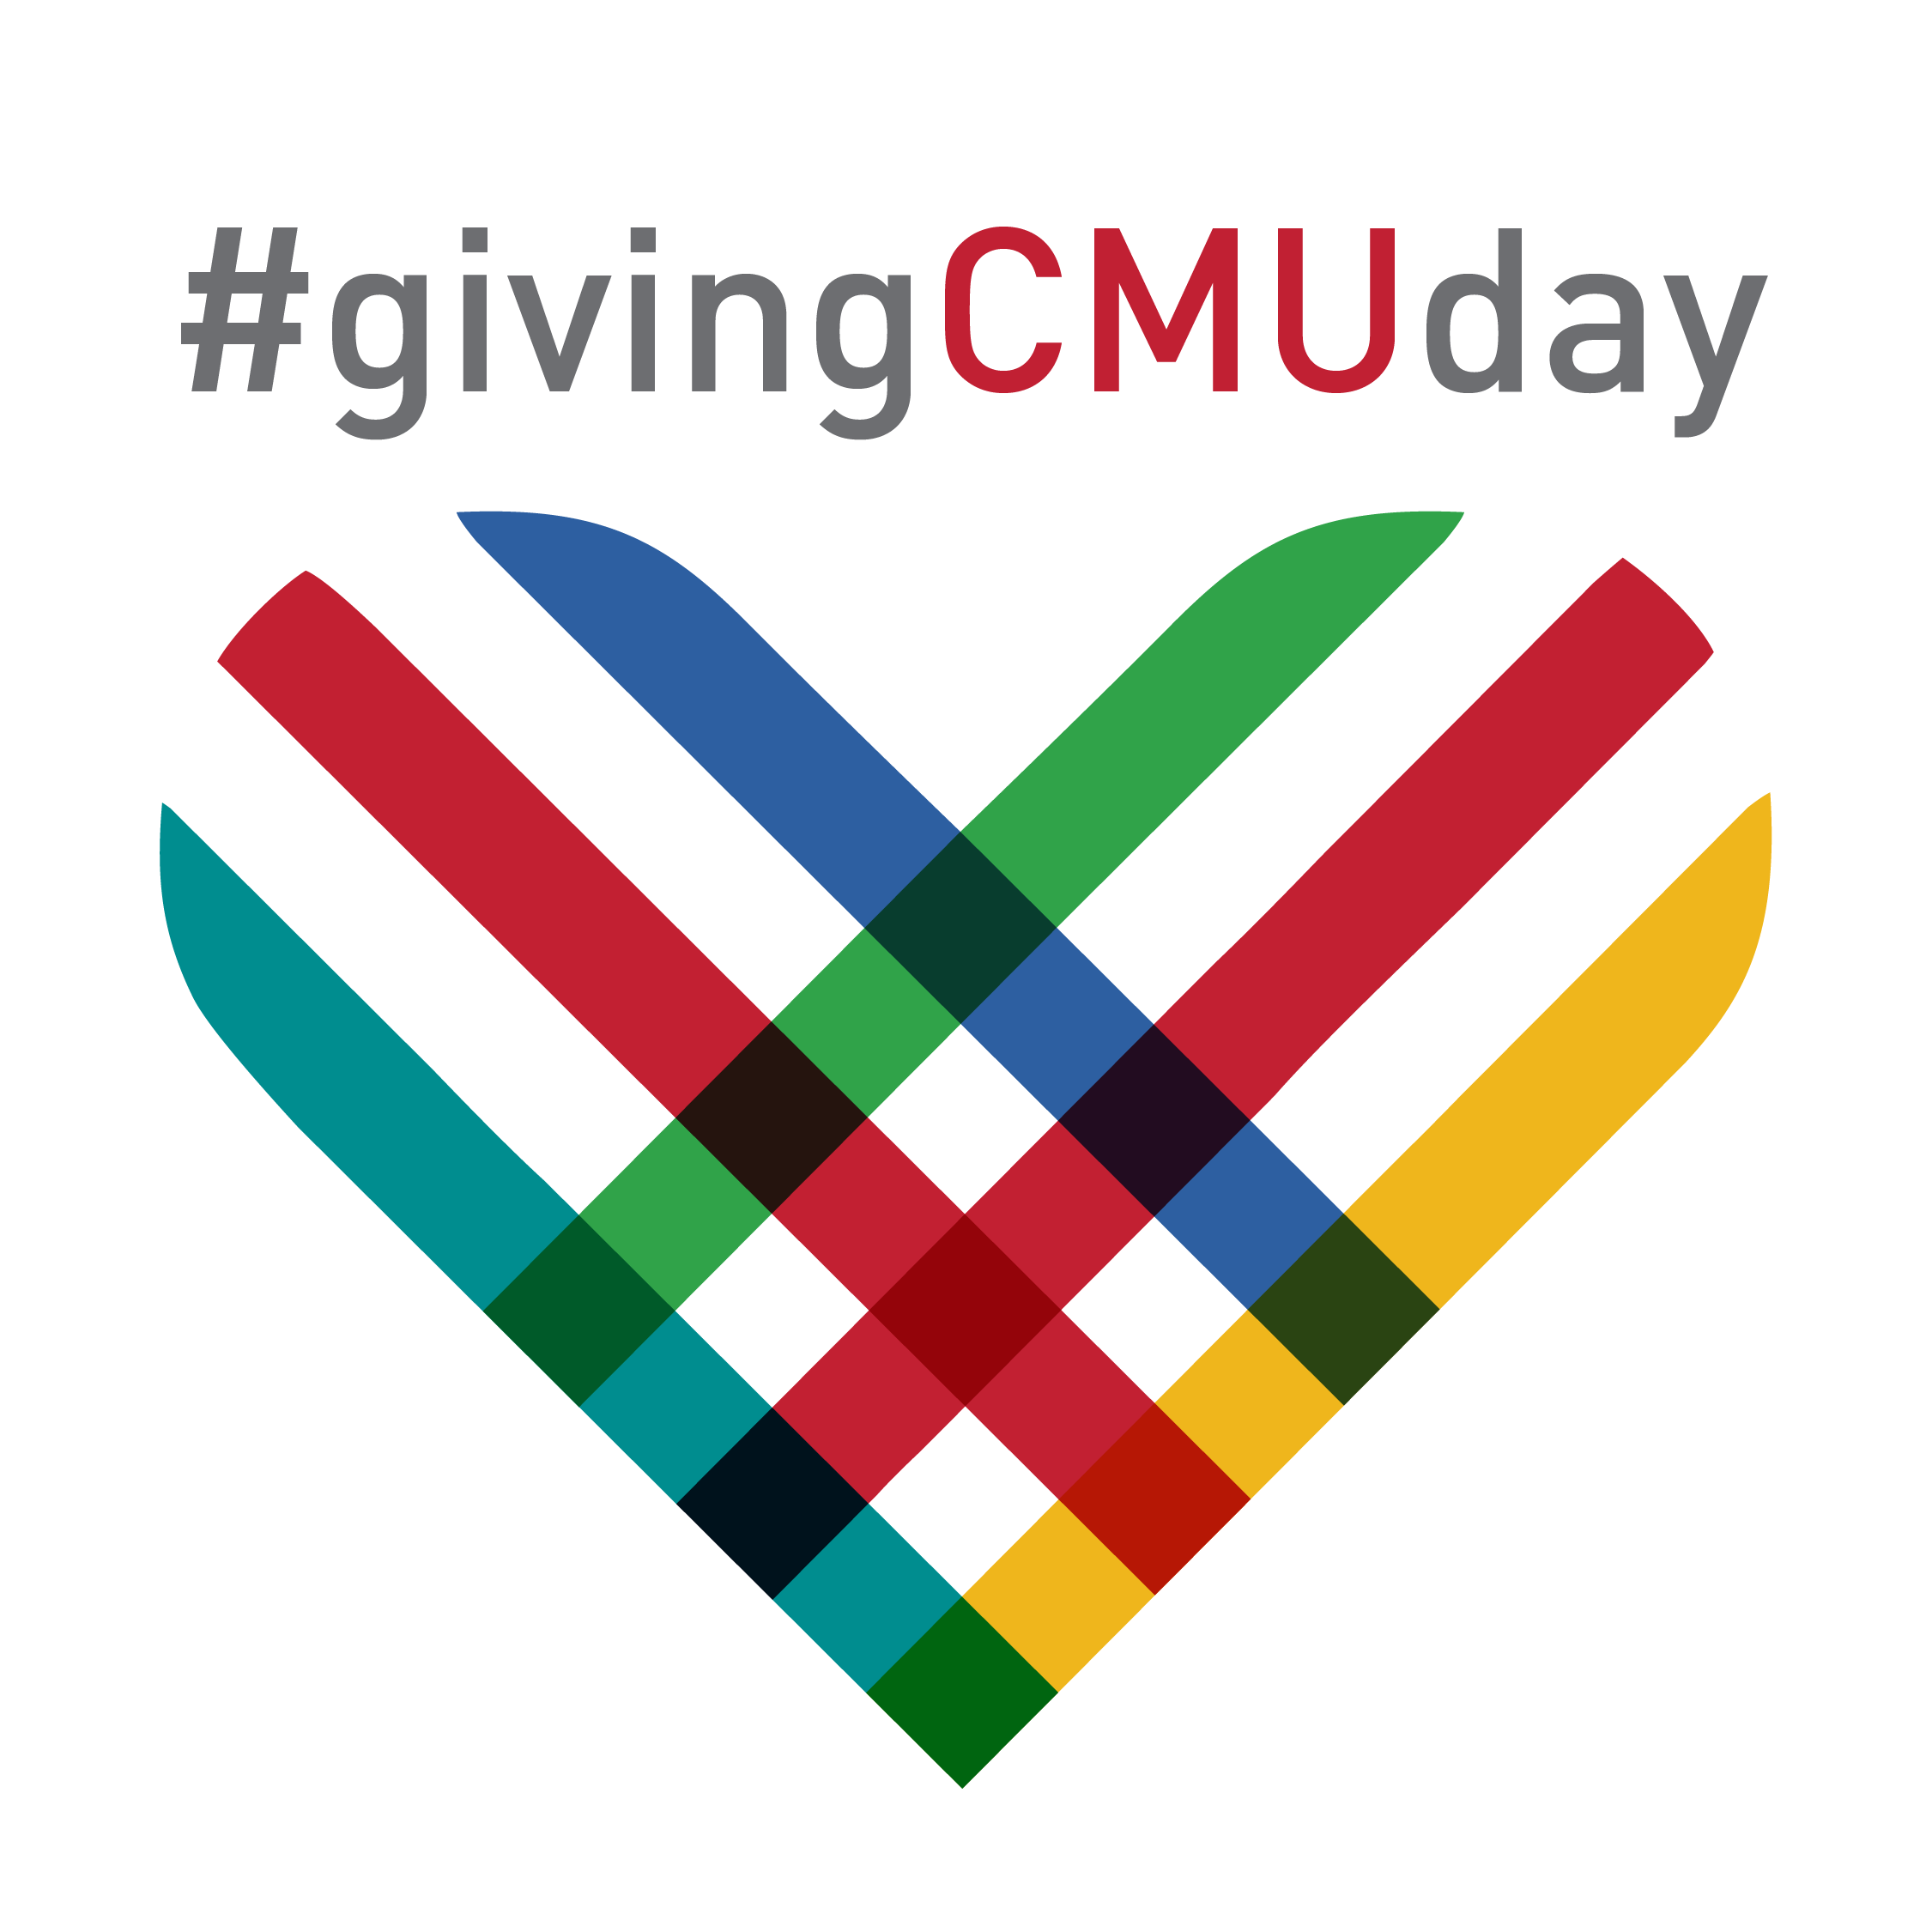 giving-cmu-day-ig-5.png